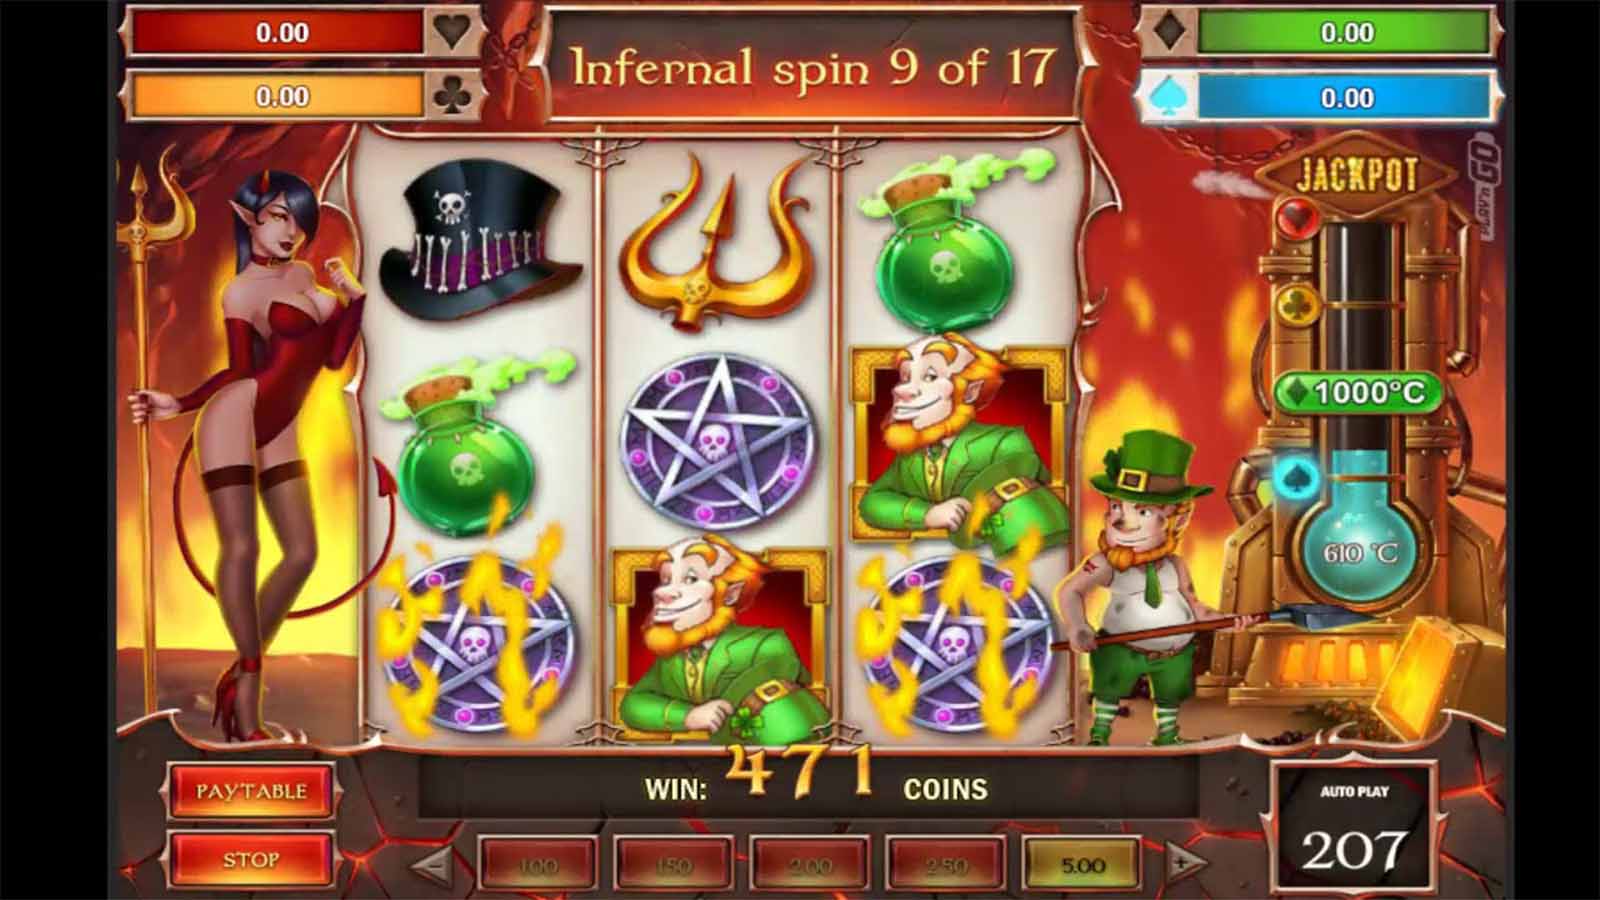 Leprechaun Goes to Hell - 96.5% payout